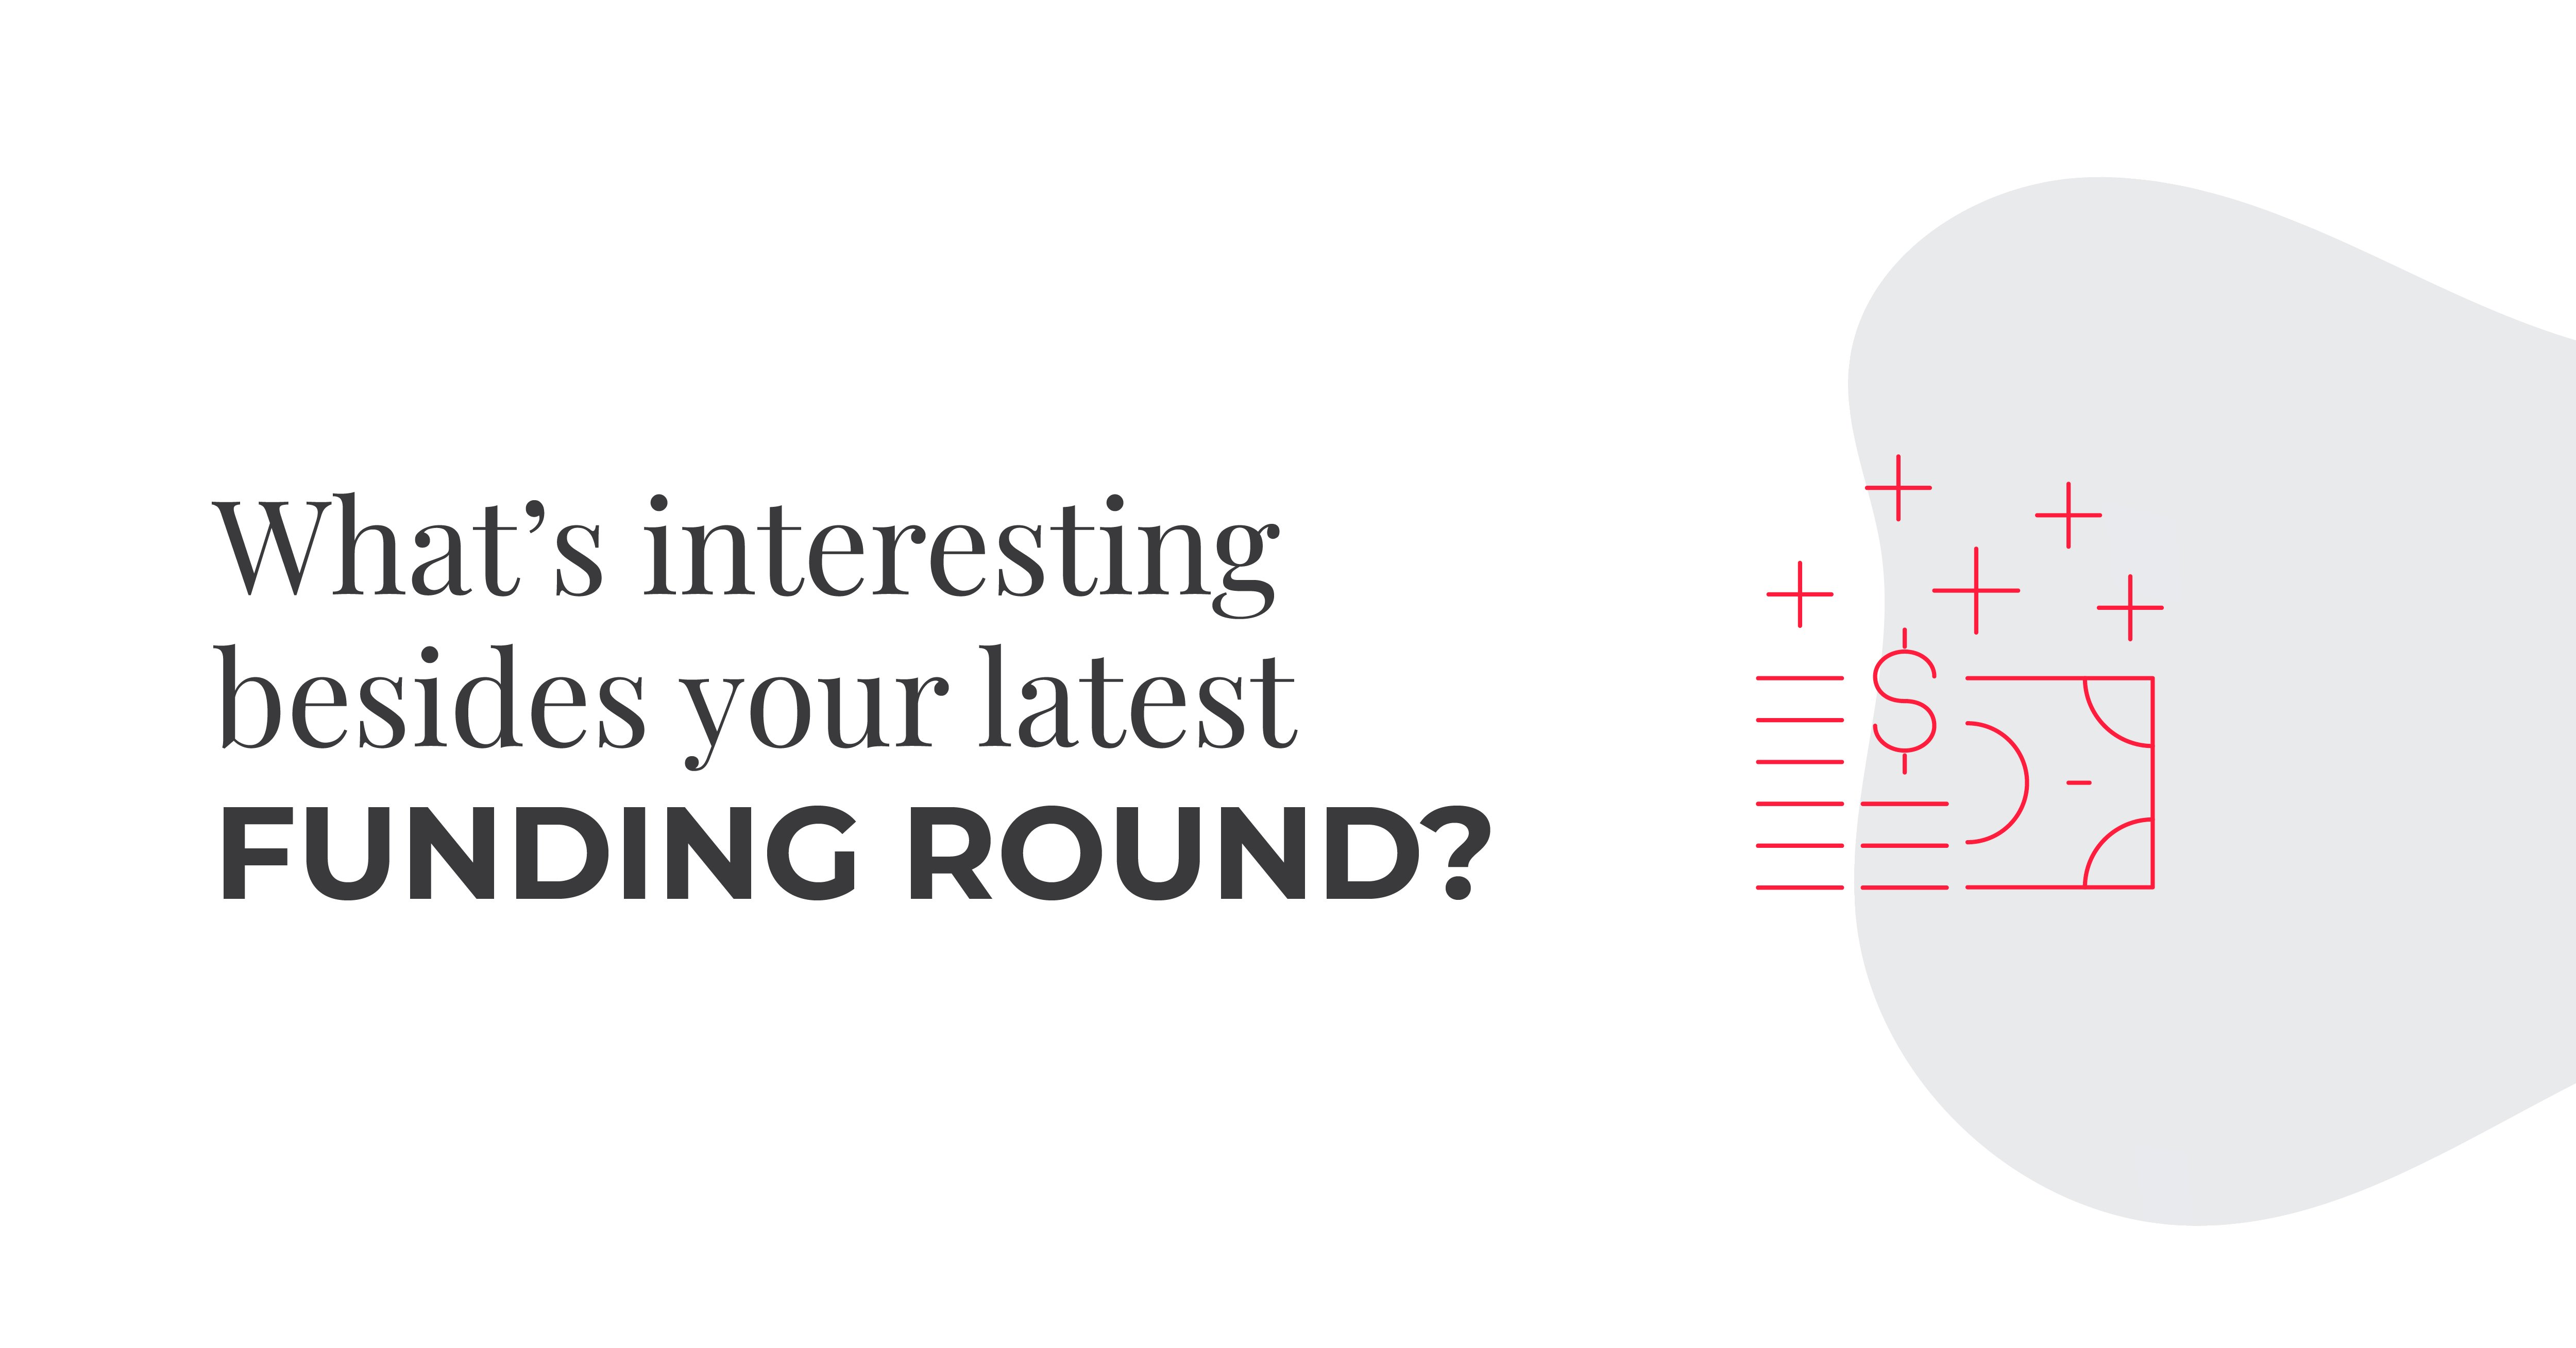 whats interesting besides your latest funding round